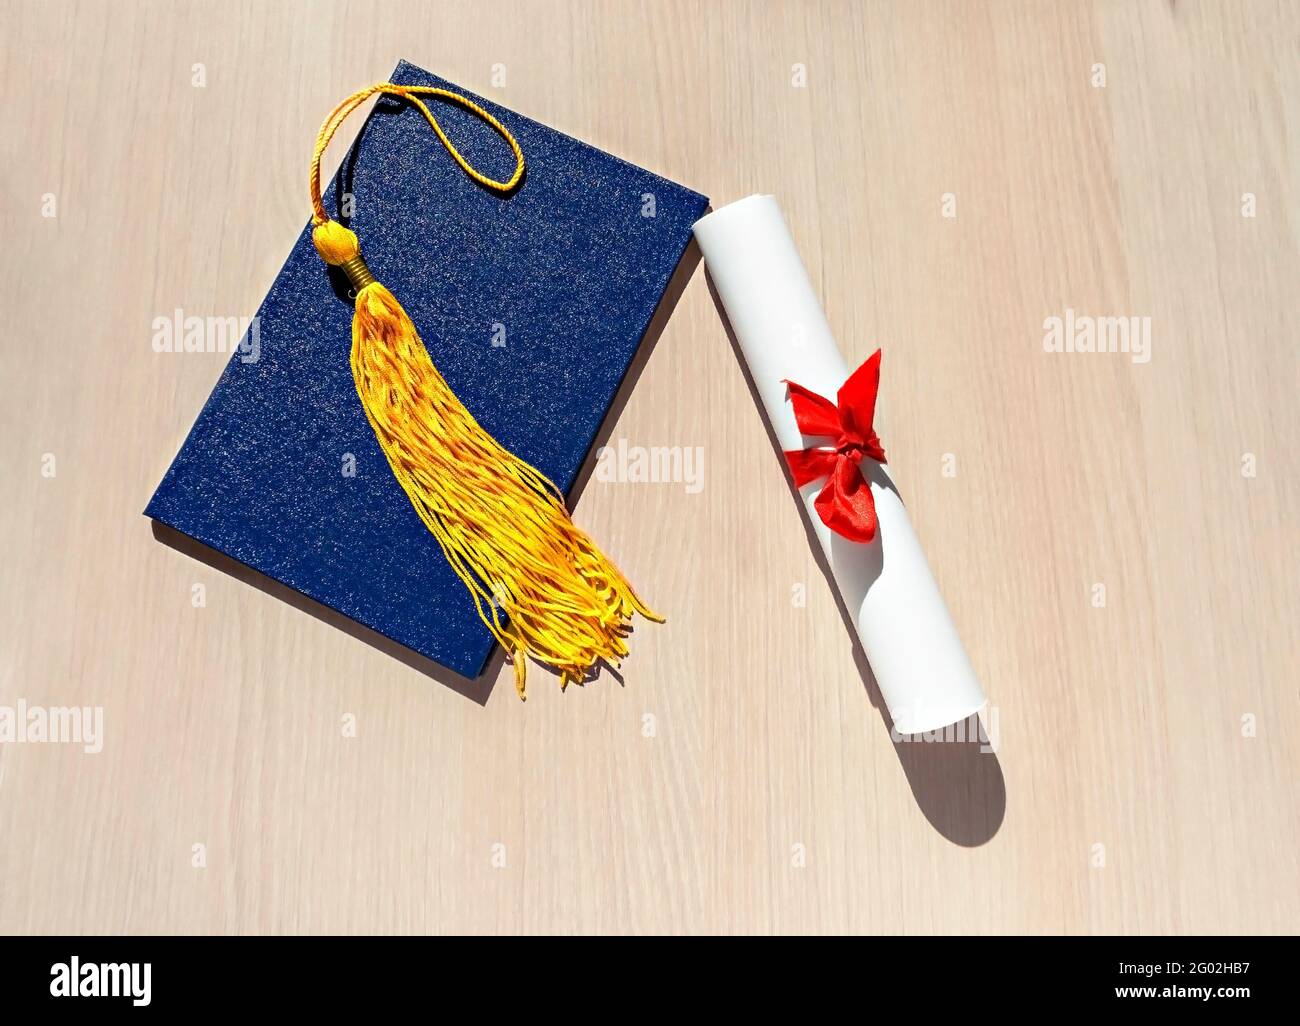 Yellow tassel from graduation cap, blue diploma and paper scroll tied with red ribbon with bow on beige wooden background, Flat lay, top view, mortarb Stock Photo